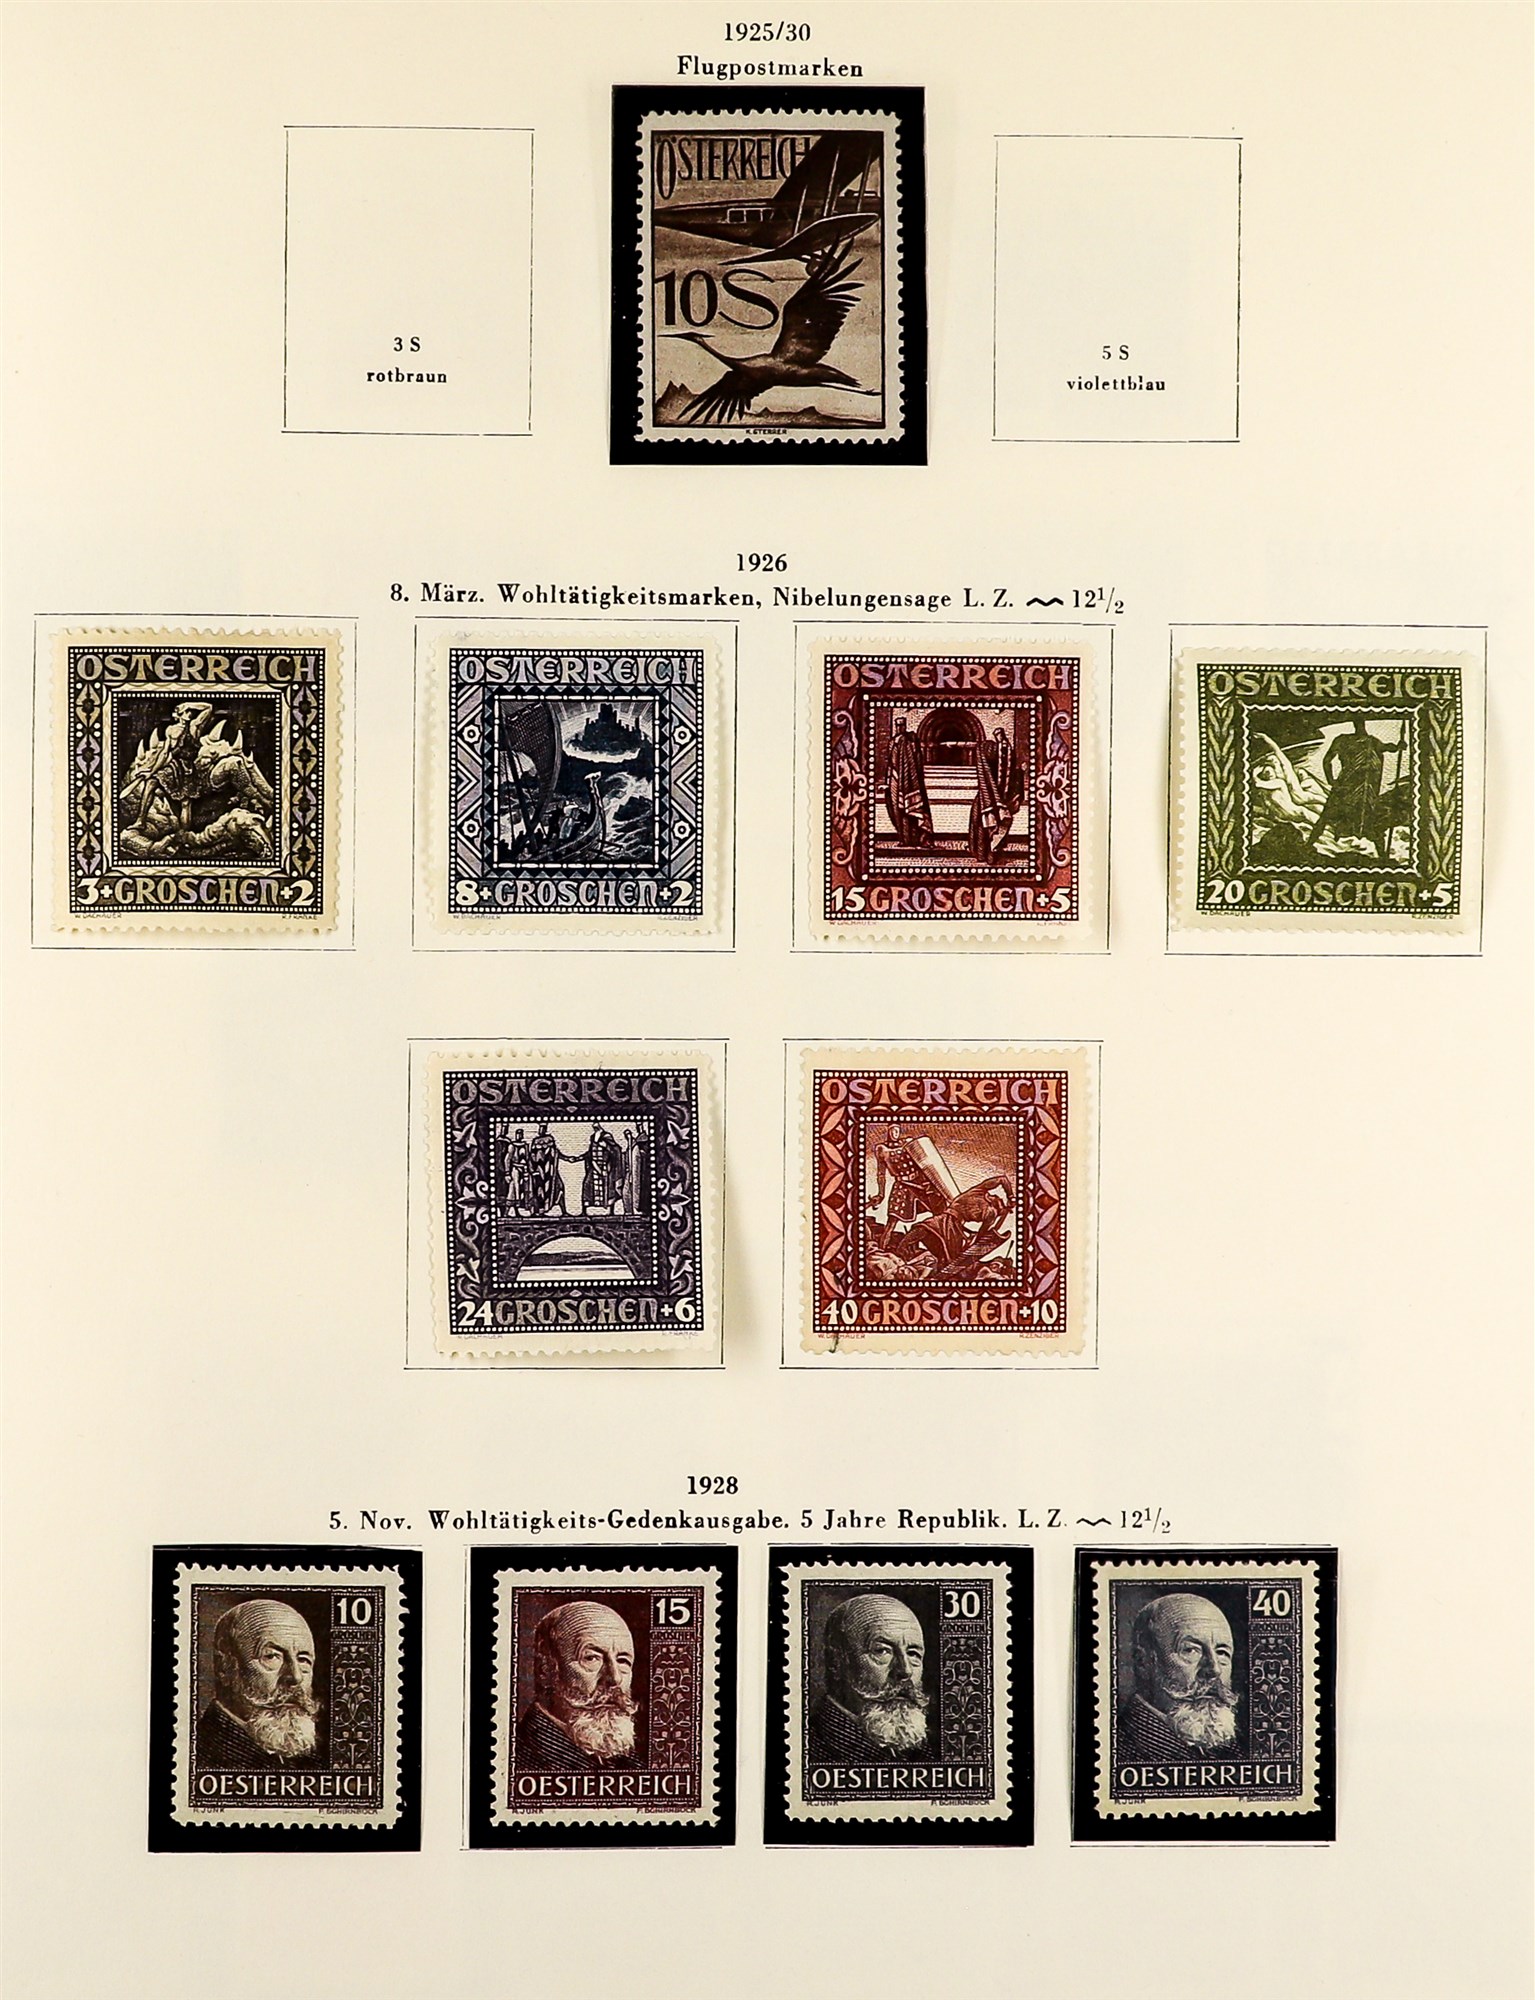 AUSTRIA 1918 - 1937 REPUBLIC COLLECTION of chiefly mint / never hinged mint sets in album incl - Image 18 of 22